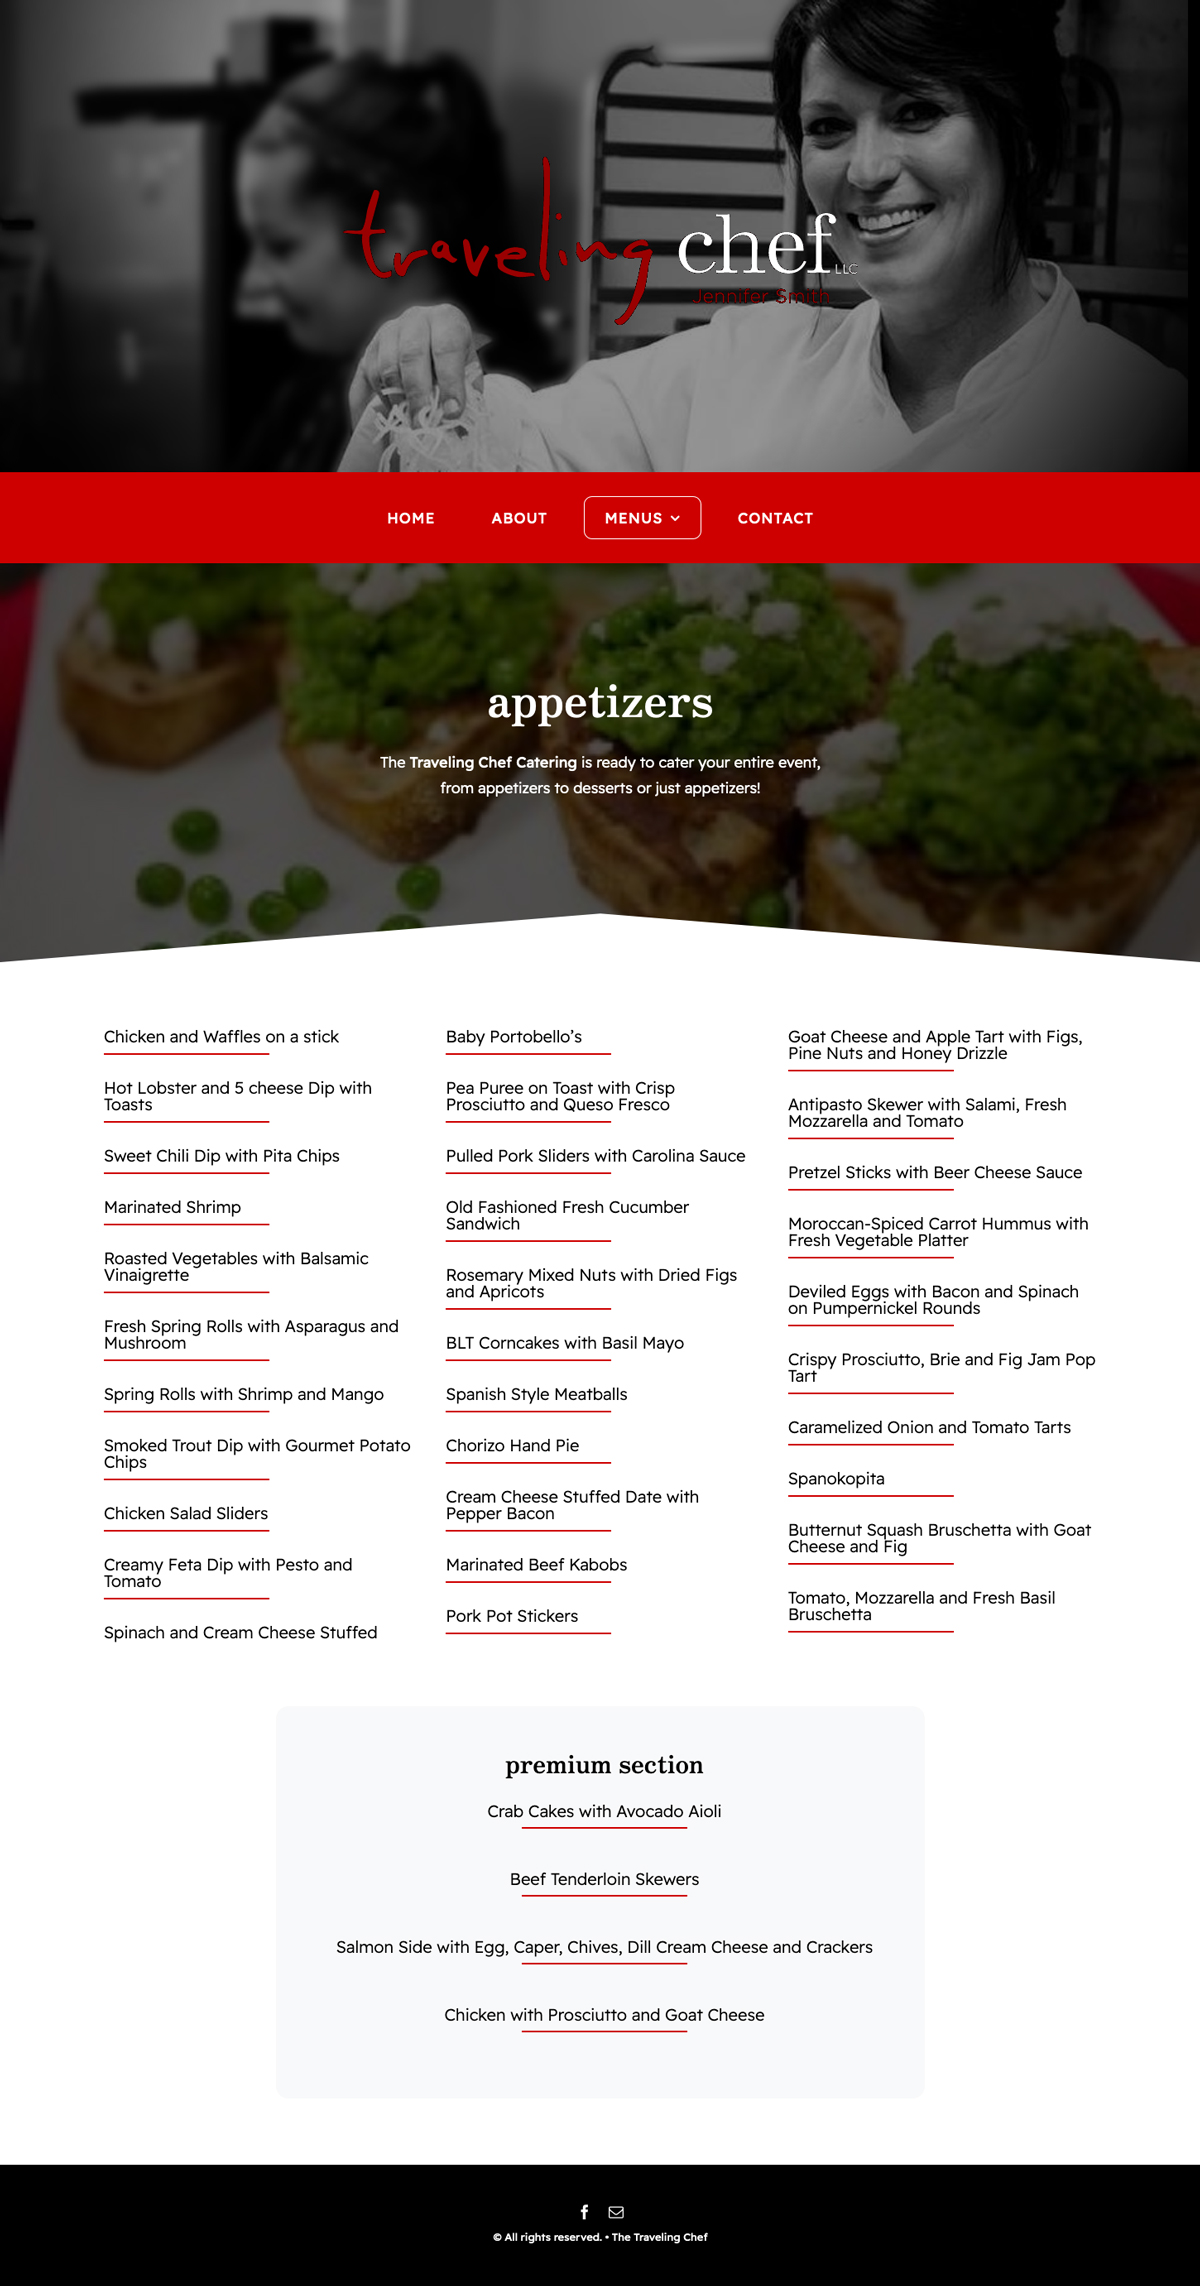 Website Design for The Traveling Chef Catering and Personal Chef - Appetizers